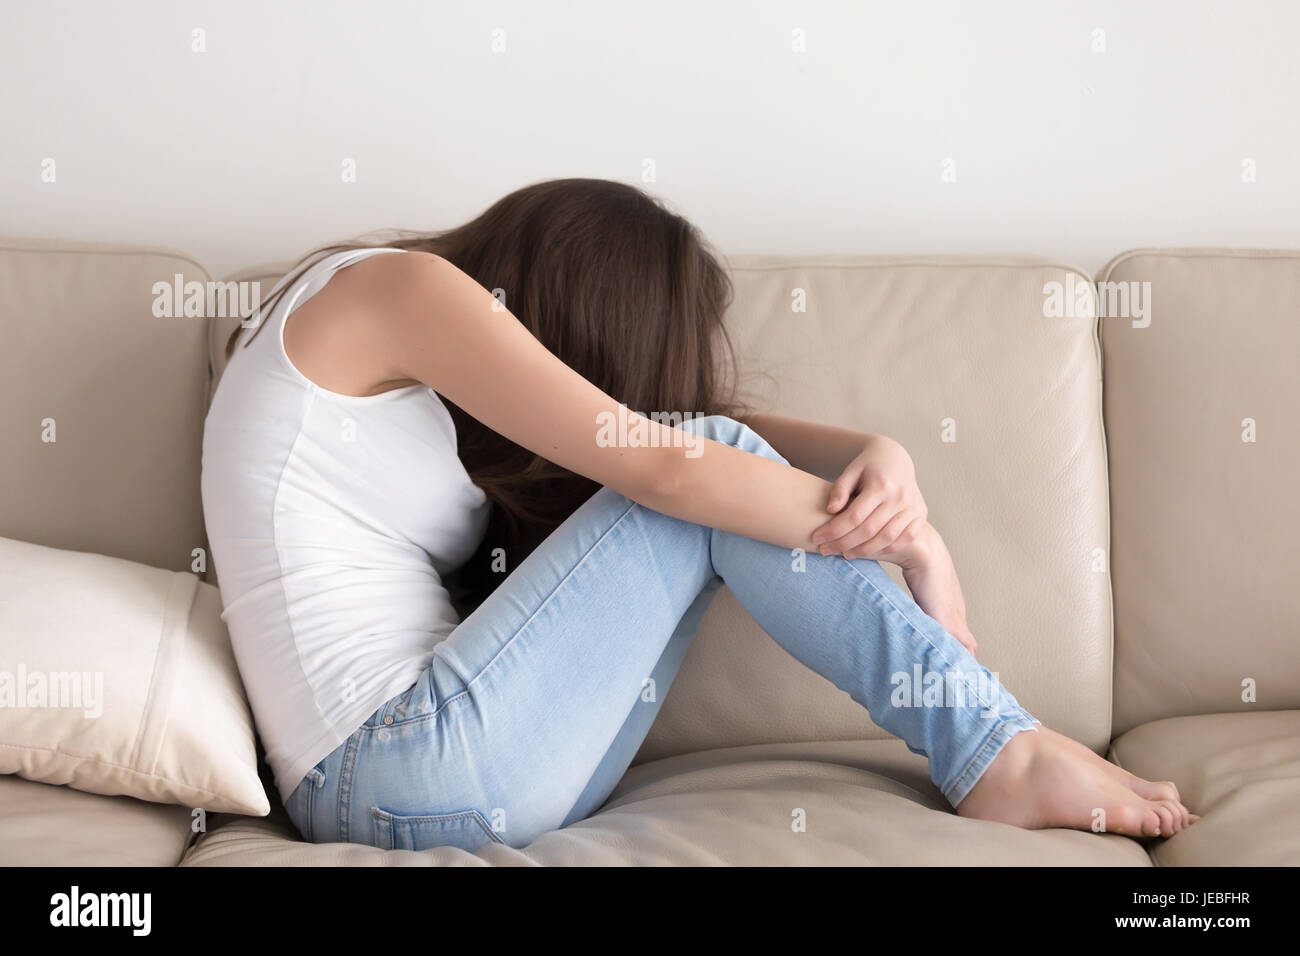 Depressed teen sitting on sofa and embracing knees Stock Photo